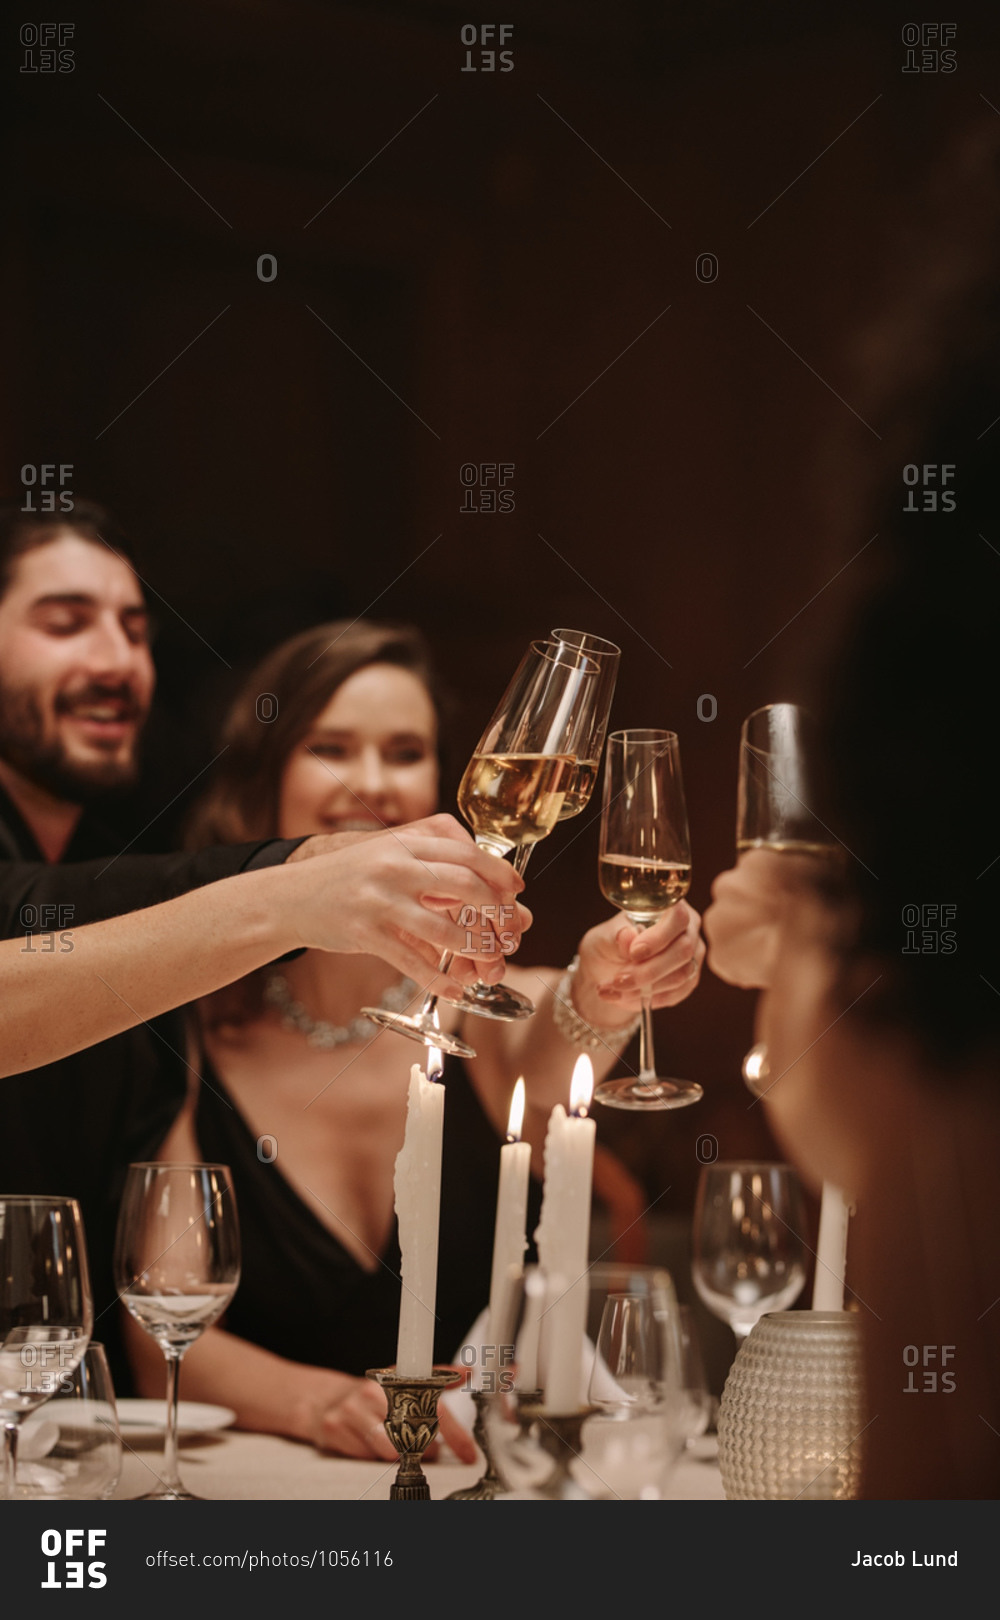 Group of men and women celebrating party with champagne. High society people at a dinner party toasting drinks.